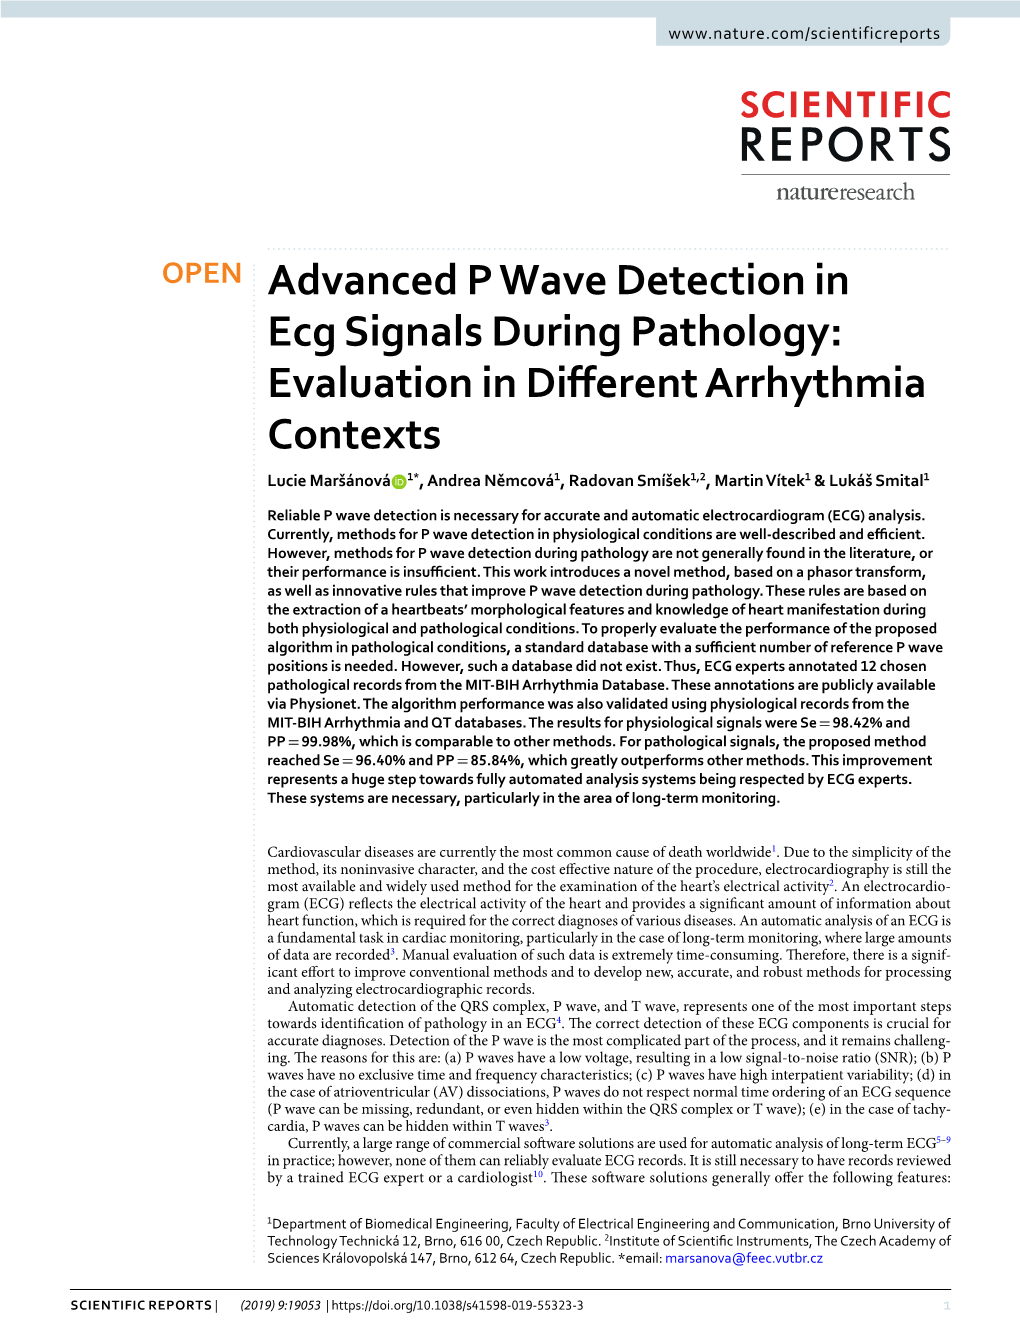 Advanced P Wave Detection in Ecg Signals During Pathology